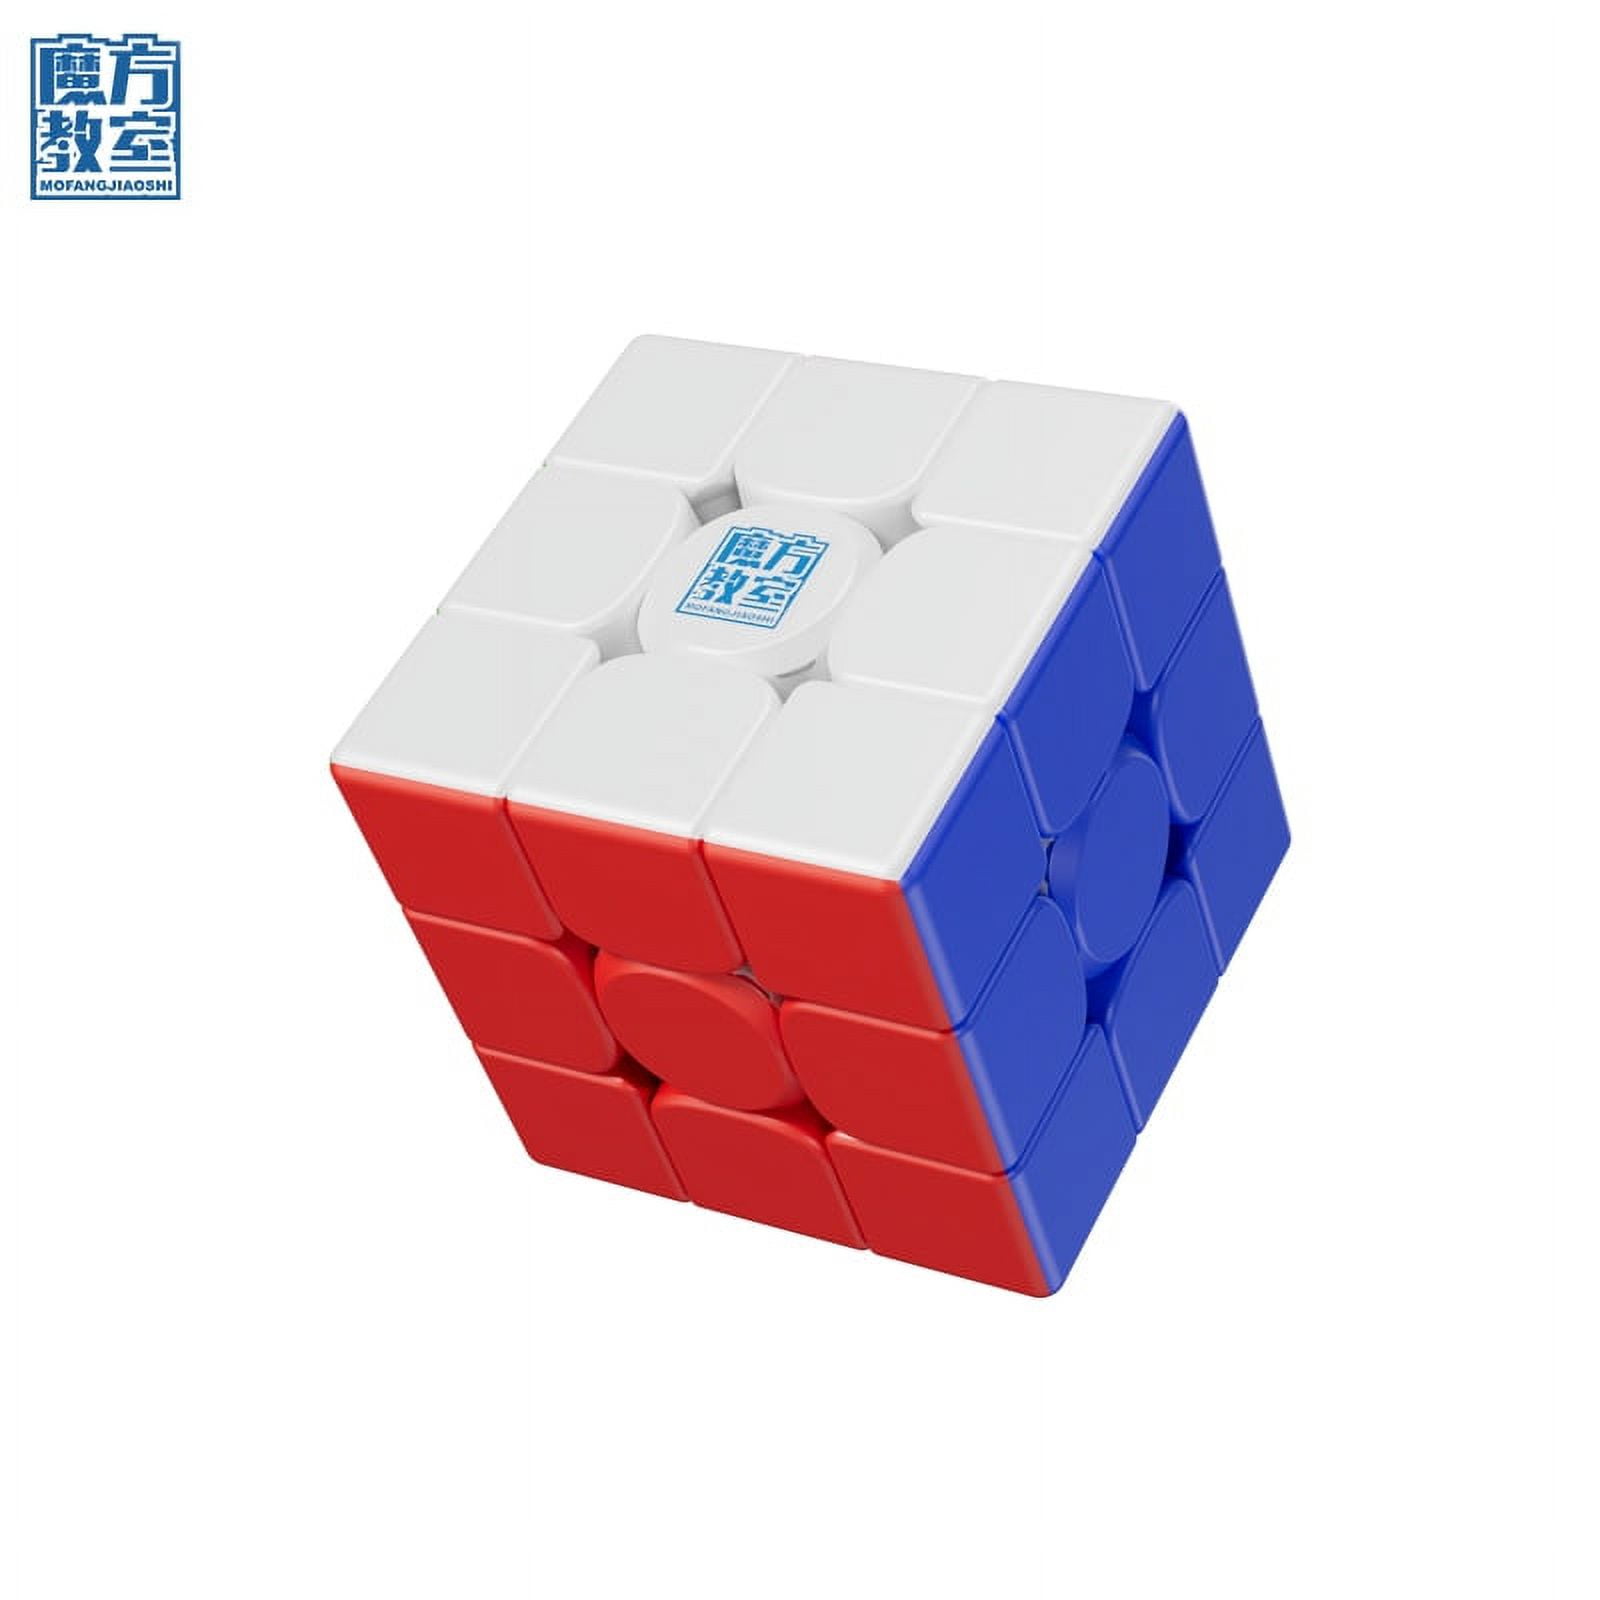 MoYu RS3M V5 3x3 M Magic Cube with Display Stand (MagLev Version/Color